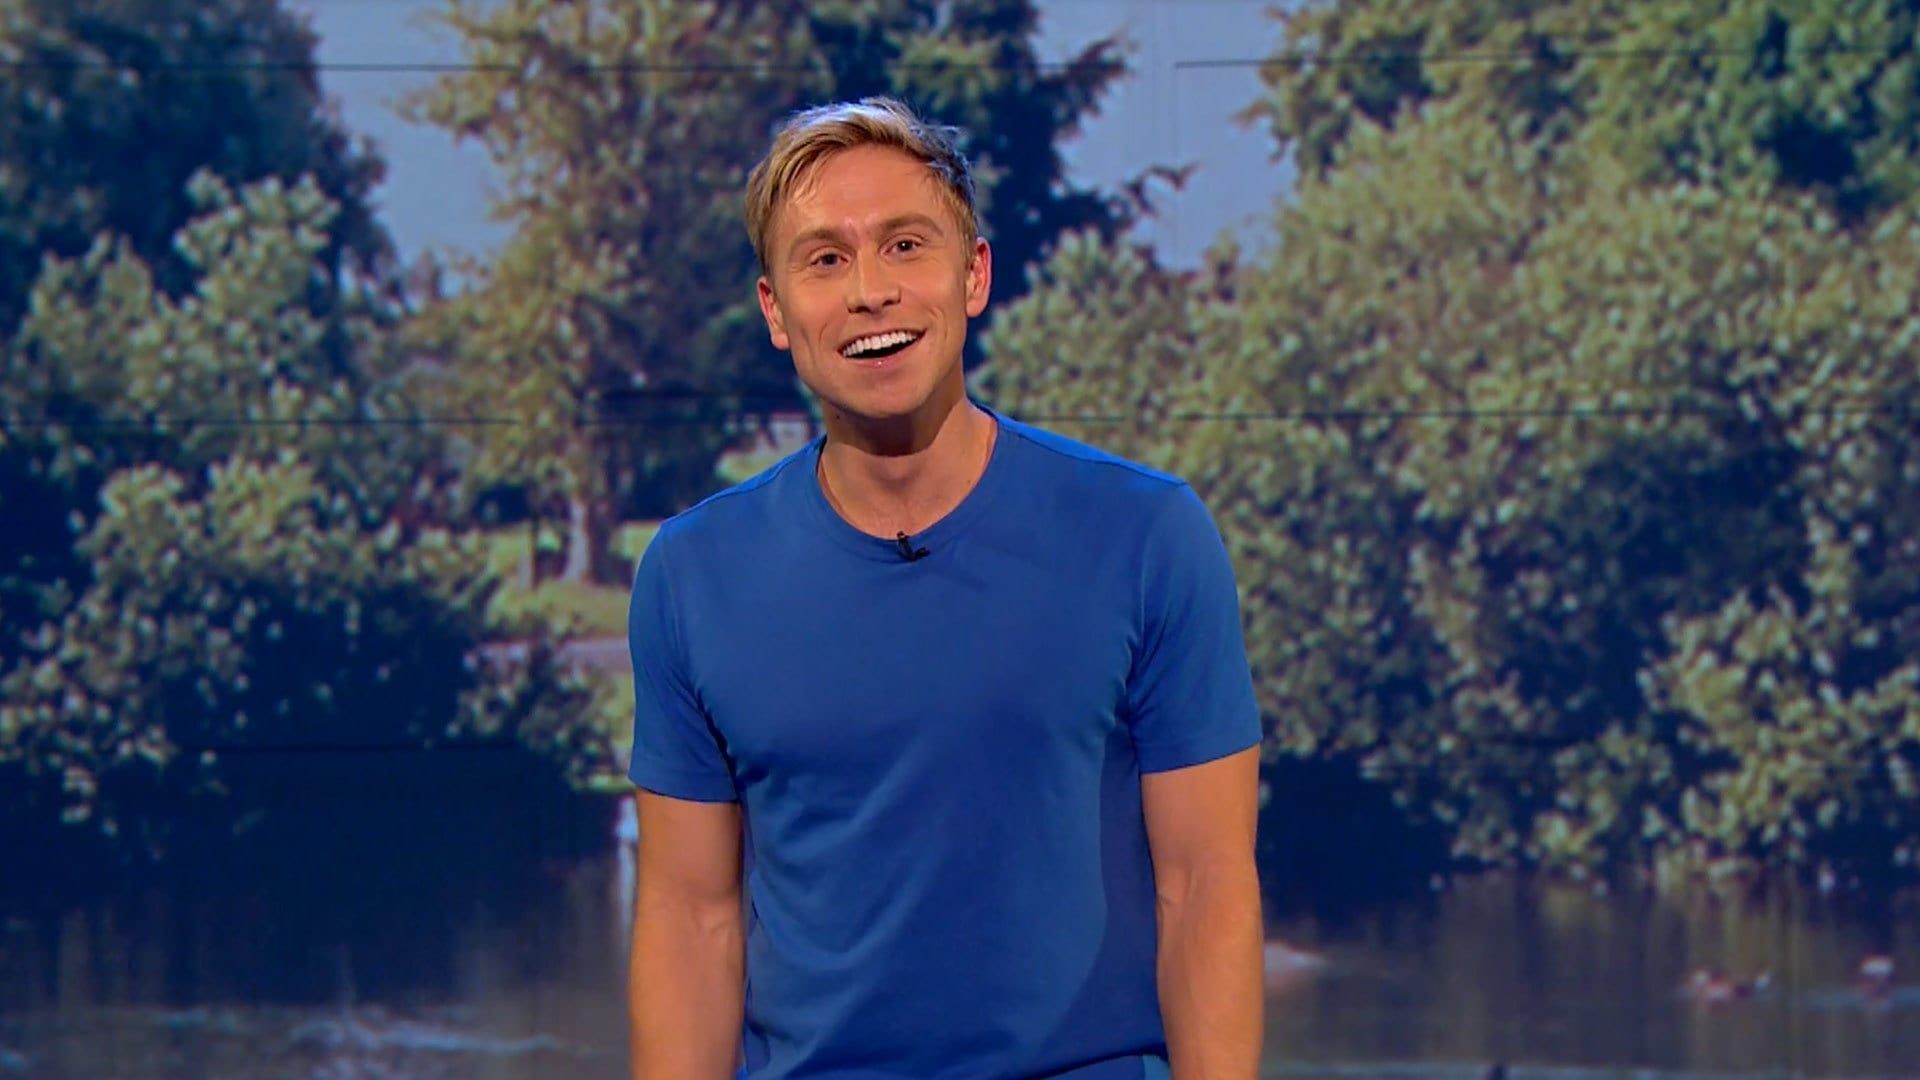 Russell Howard's Good News background